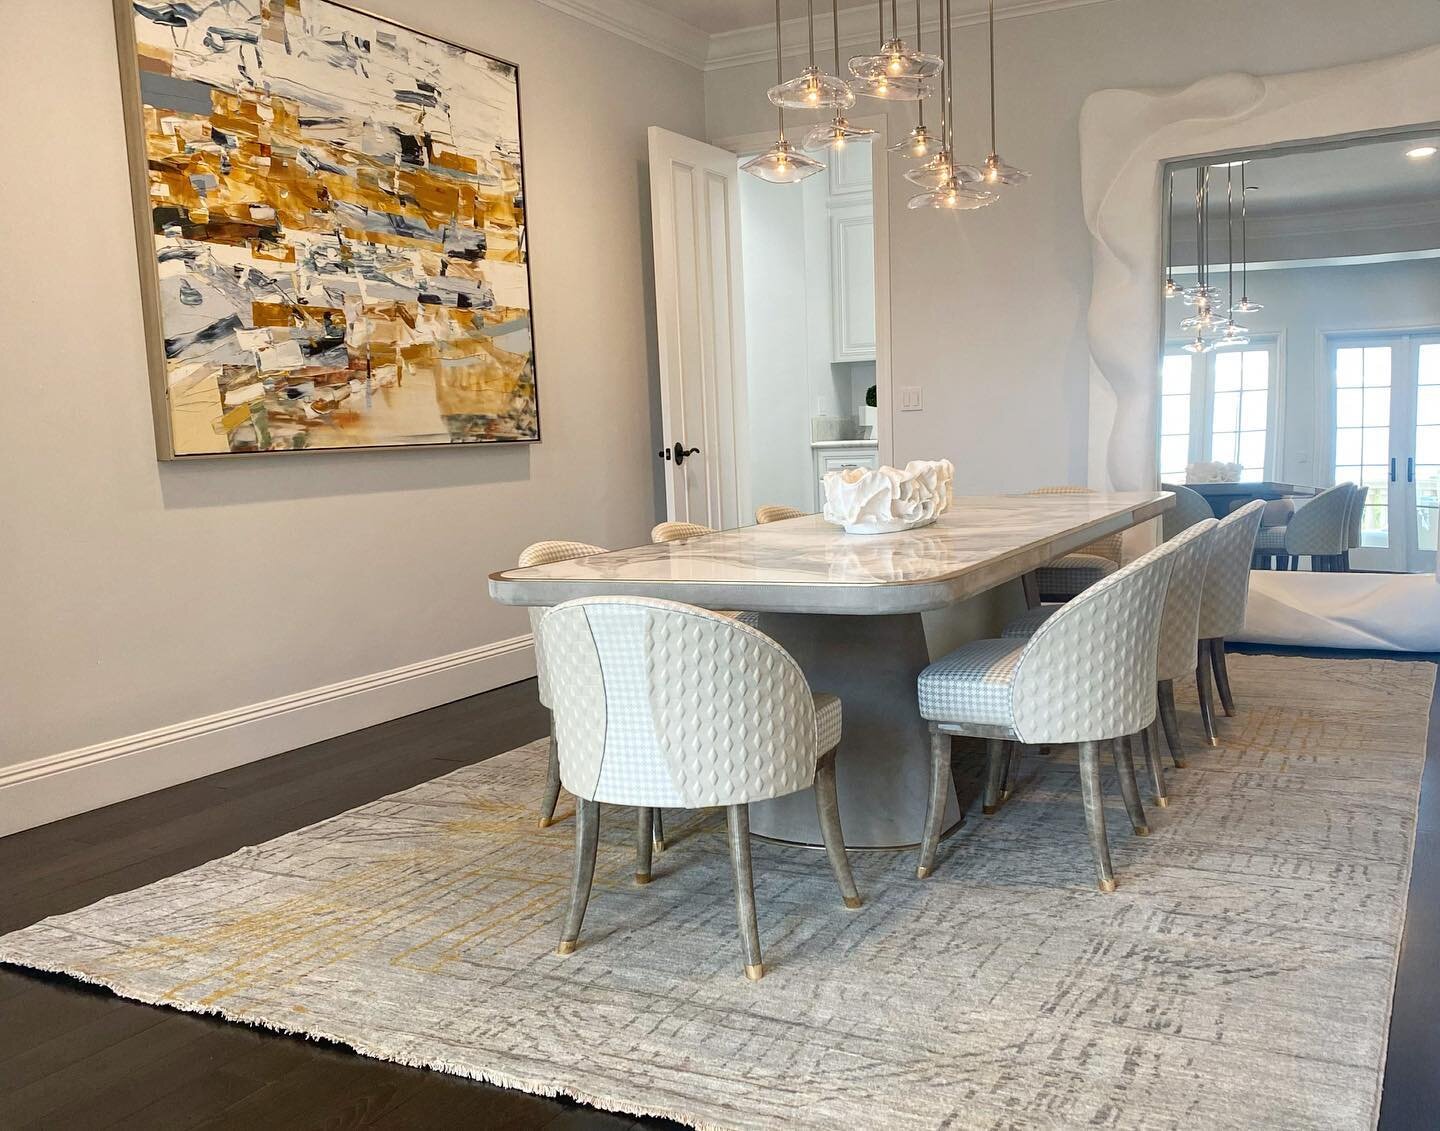 A finely hand crafted modern Afghan rug, made in a custom size for our client&rsquo;s beautiful dinning space! 

#serapiruggallery #design #interiors #homedecor #interiordesign #handknottedrugs #handmaderugs #textiles #luxuryinteriors #interiorismo #